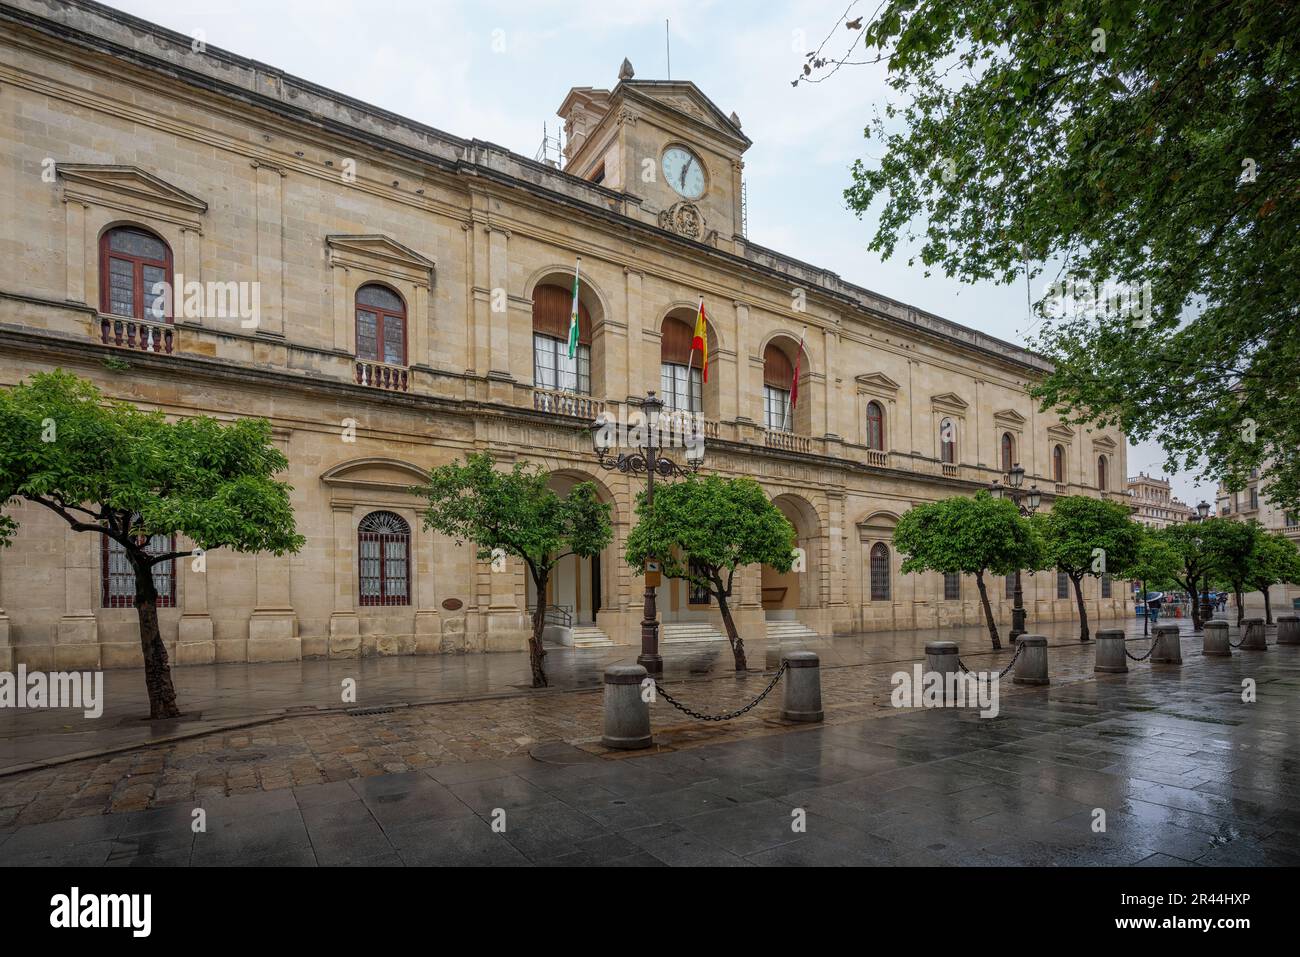 Seville City Hall at Plaza Nueva Square - Seville, Andalusia, Spain Stock Photo